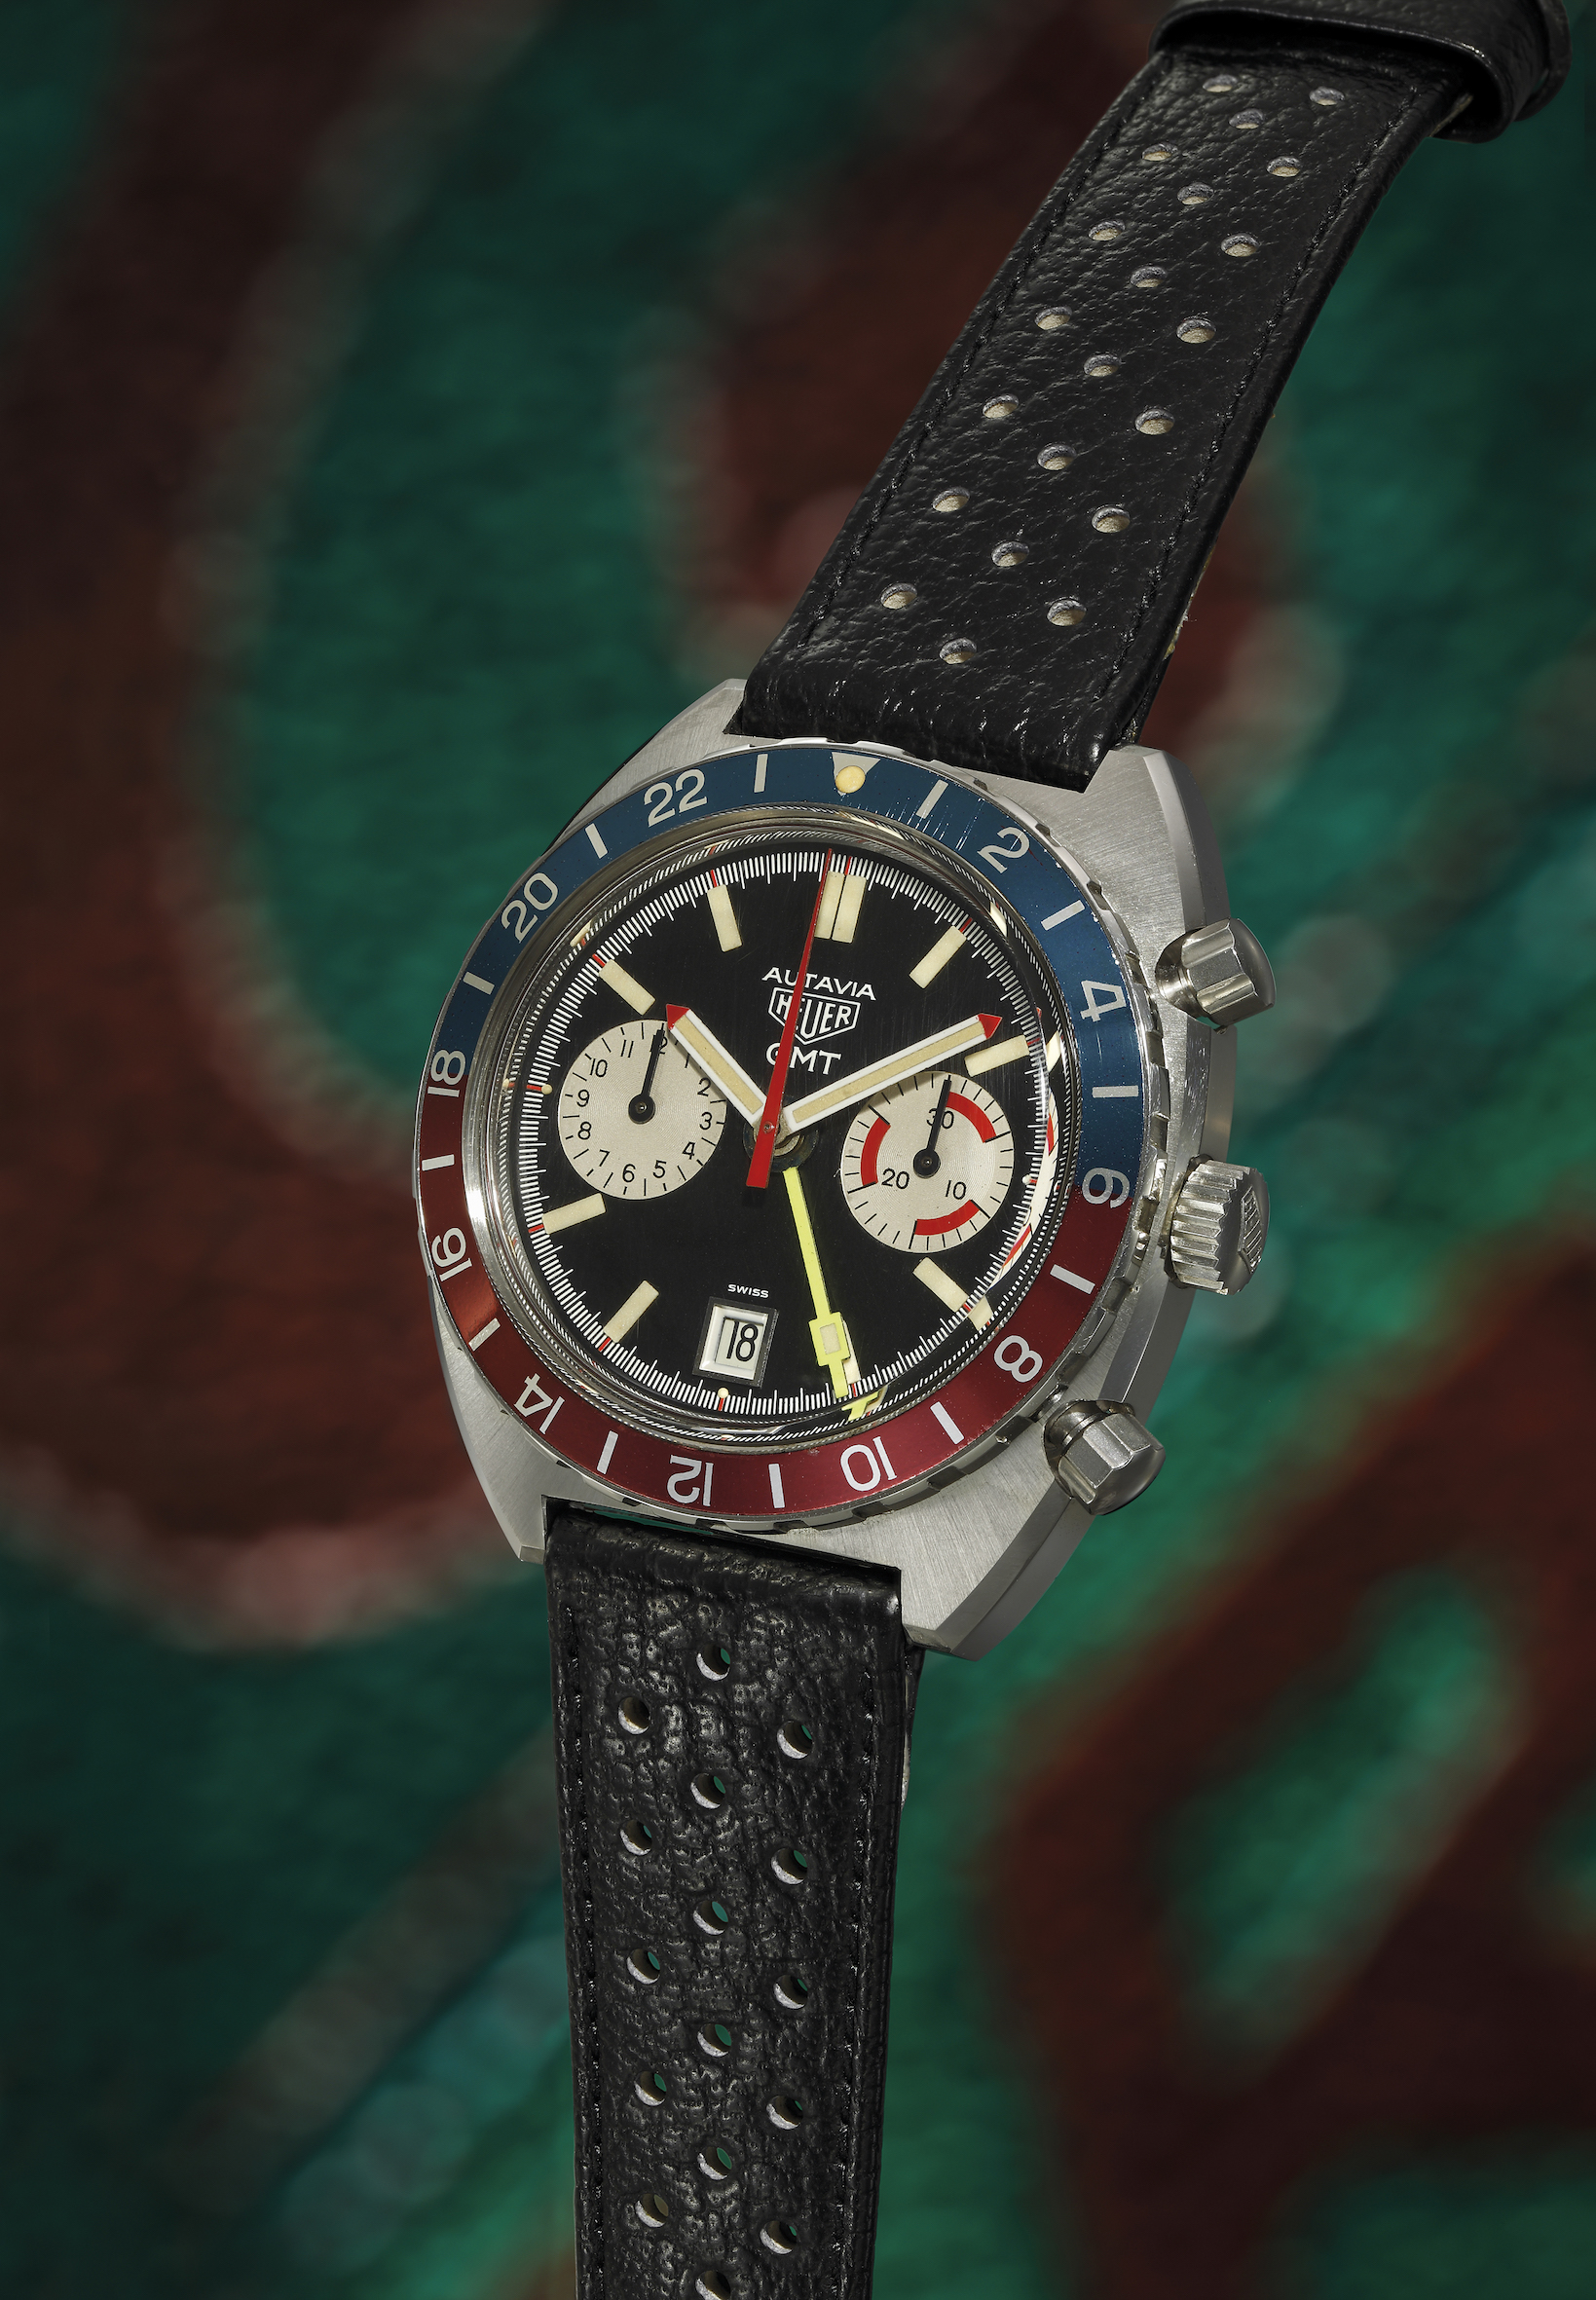 Phillips in association with Bacs & Russo presents 'The Crosthwaite & Gavin Collection: Exceptional Heuer Chronographs from the Jack Heuer Era' this November in Geneva